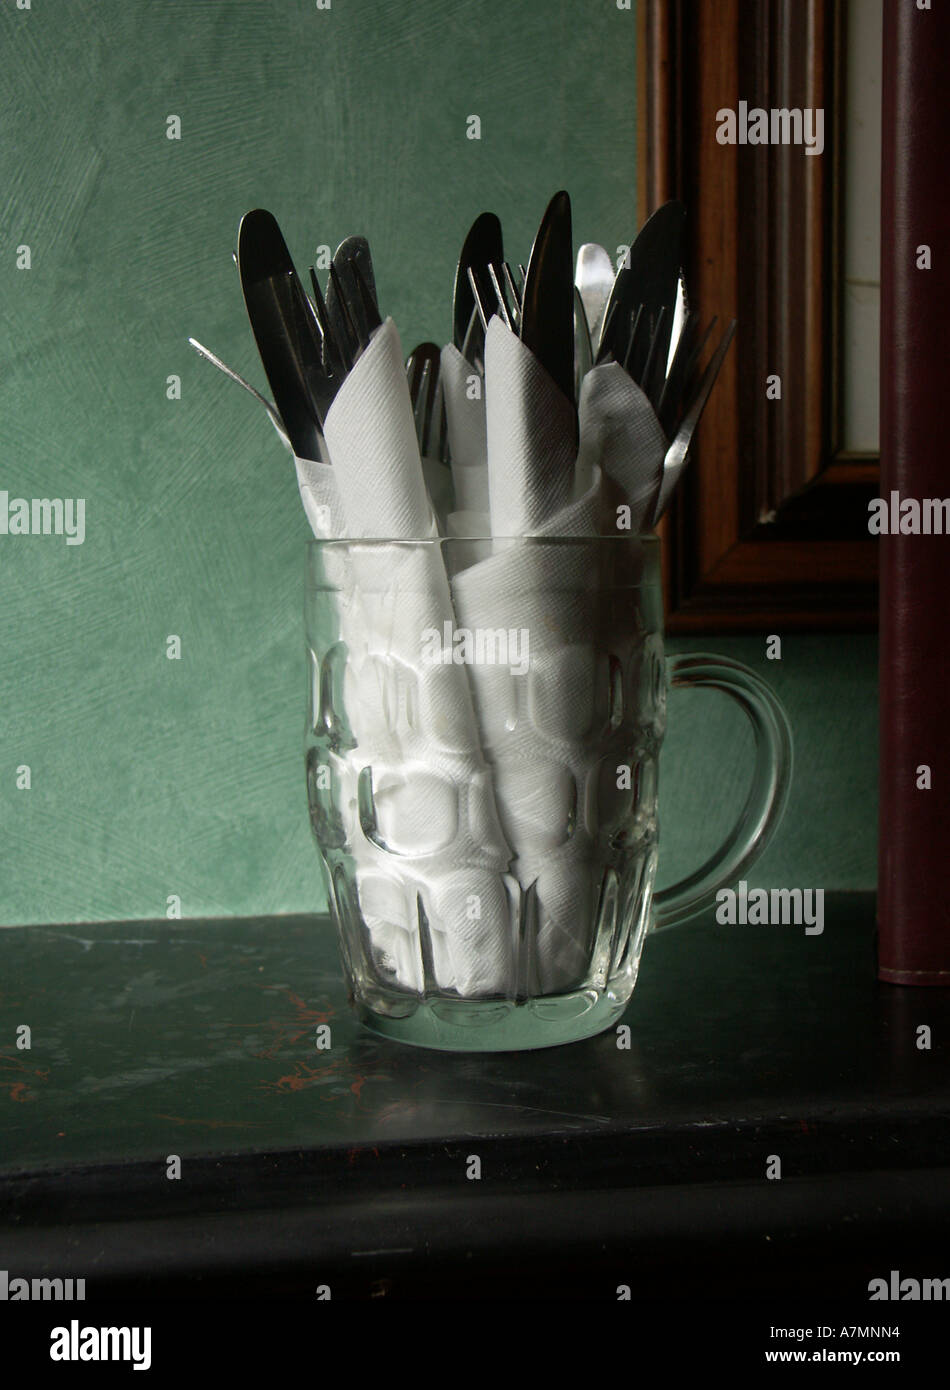 Cutlery in a Beer Glass 1 Stock Photo